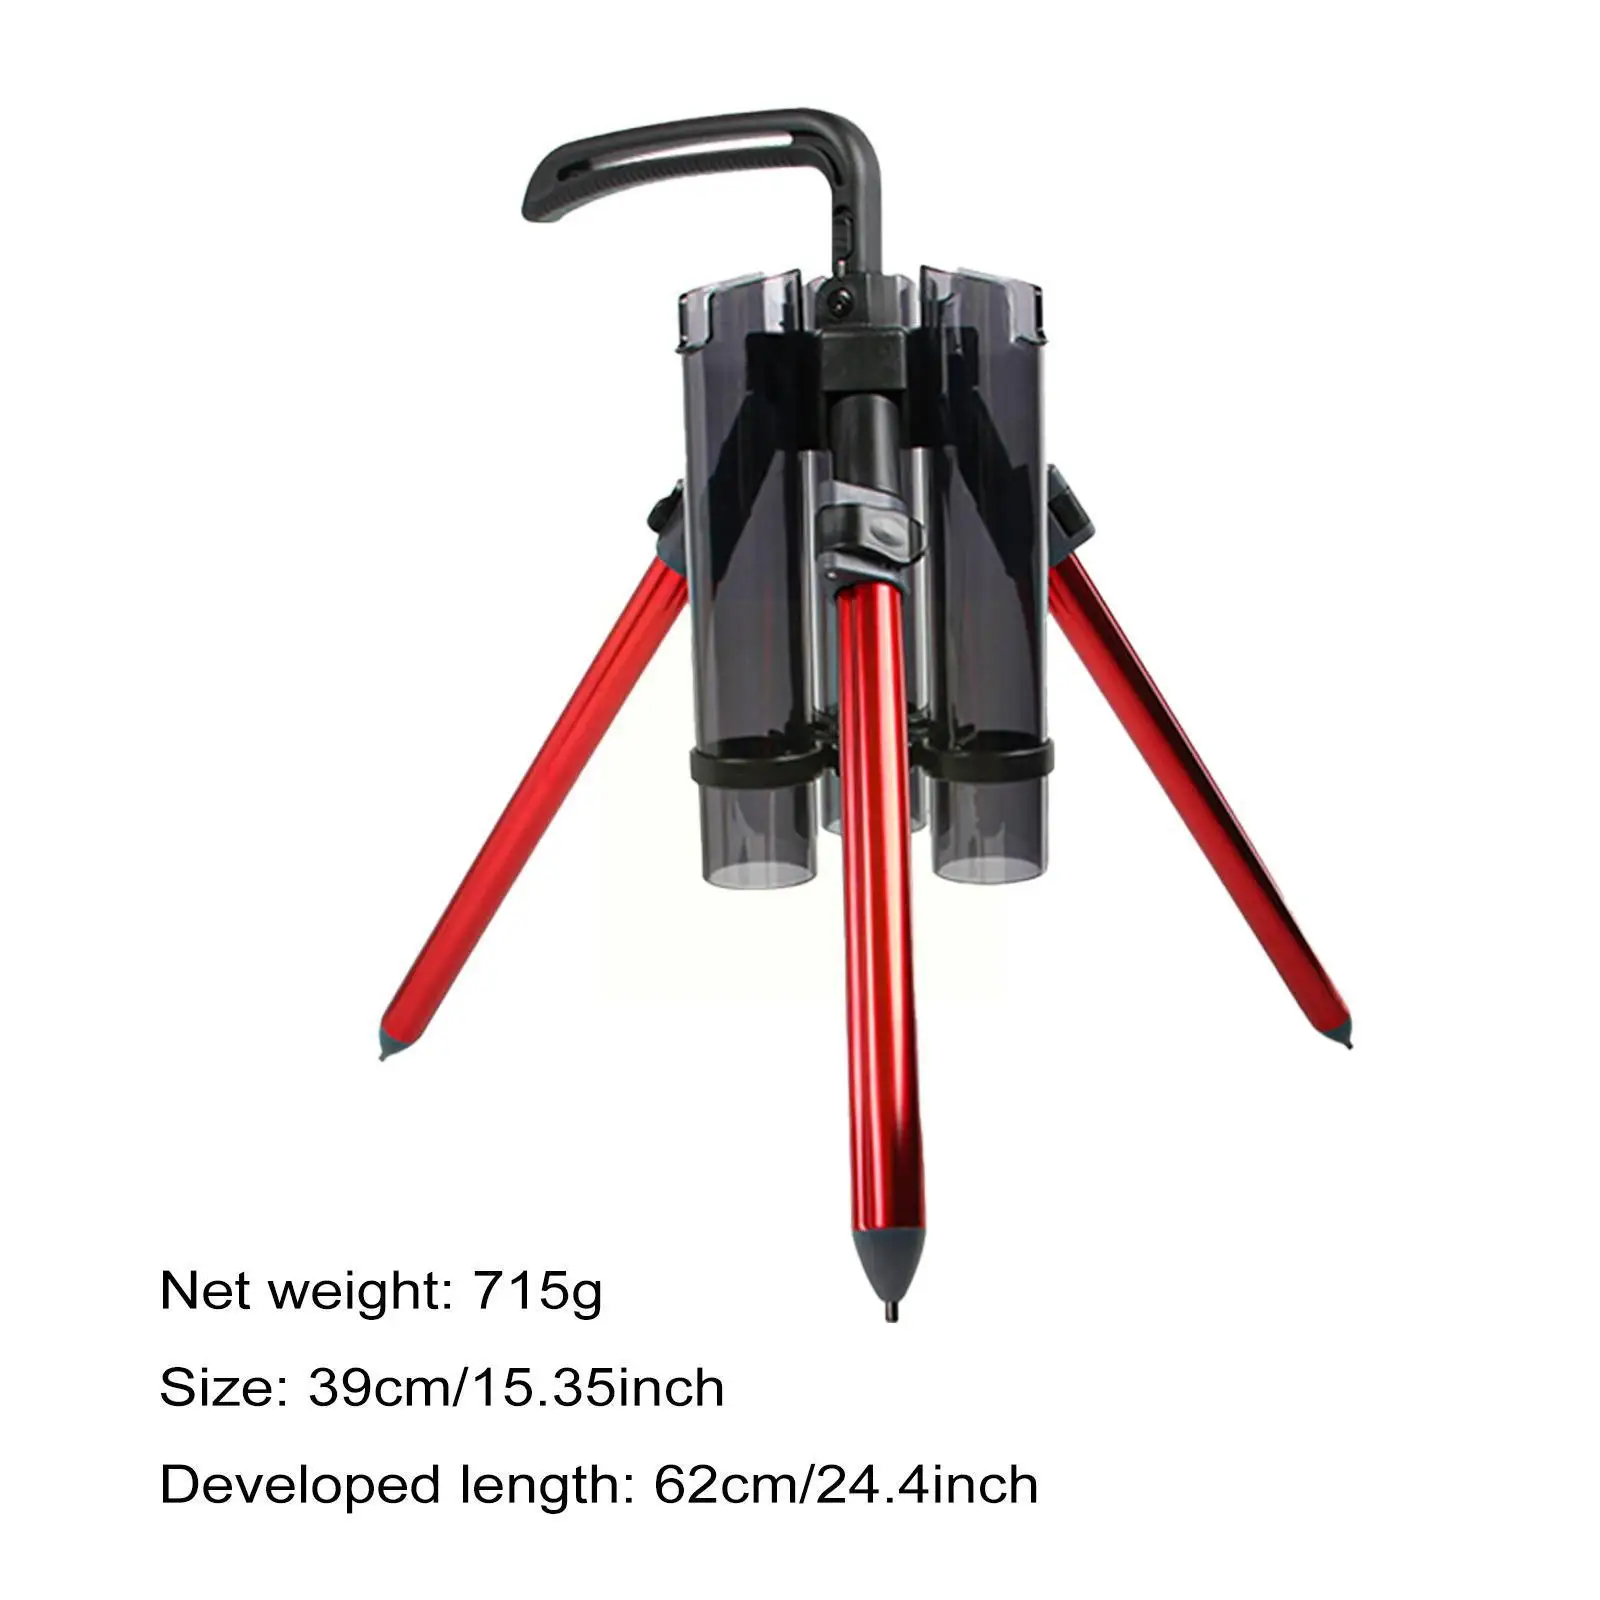 

Presso Rod Stand 530 Fishing Rod Bracket Tripod Stand Fishing Accessories Outdoor Folding Rod Portable Support Fishing L8k6